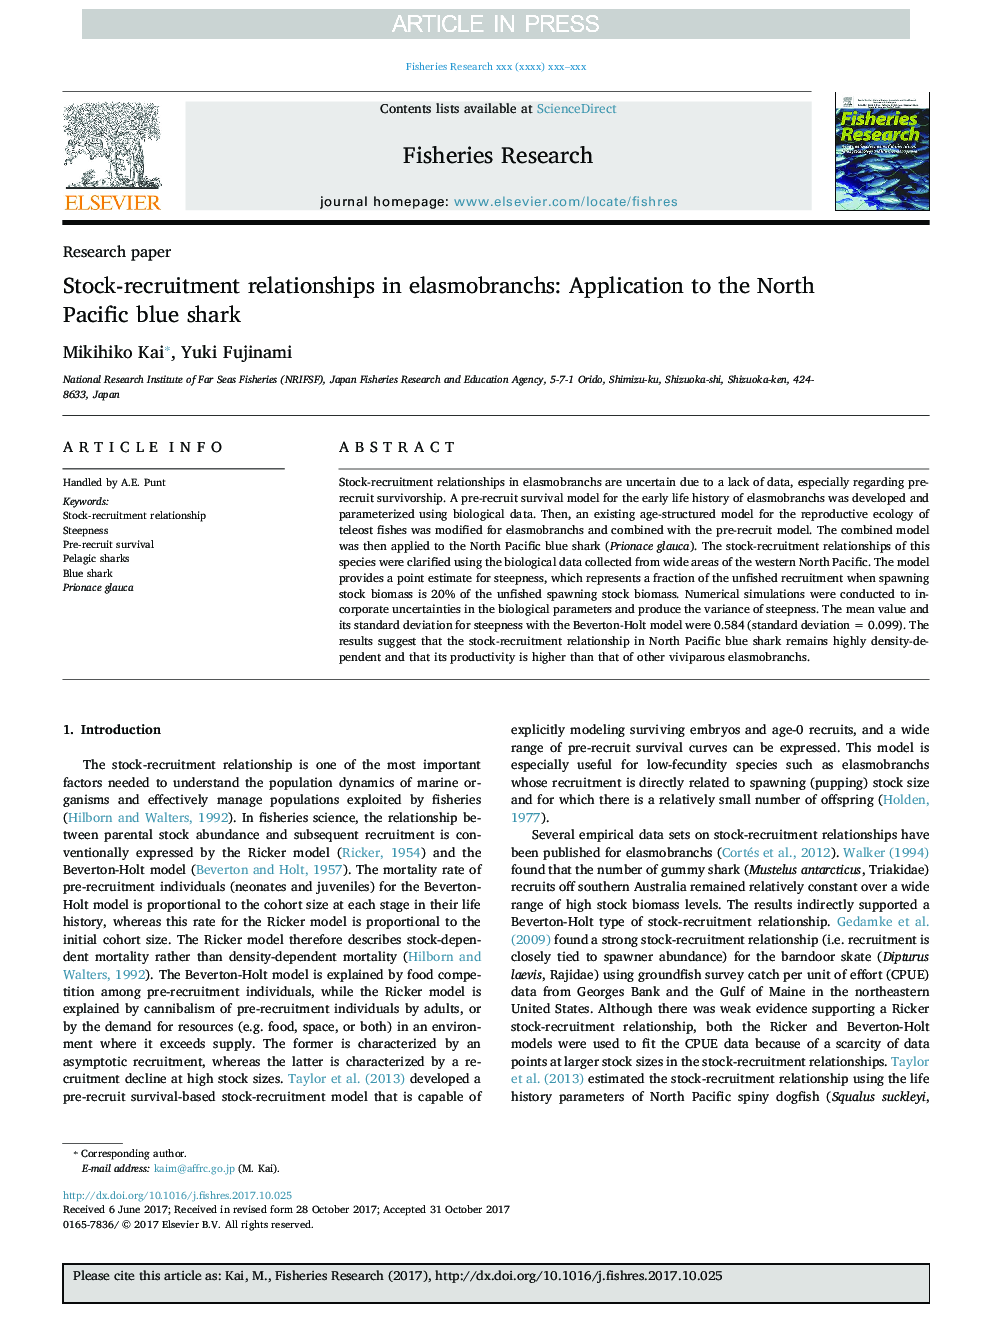 Stock-recruitment relationships in elasmobranchs: Application to the North Pacific blue shark